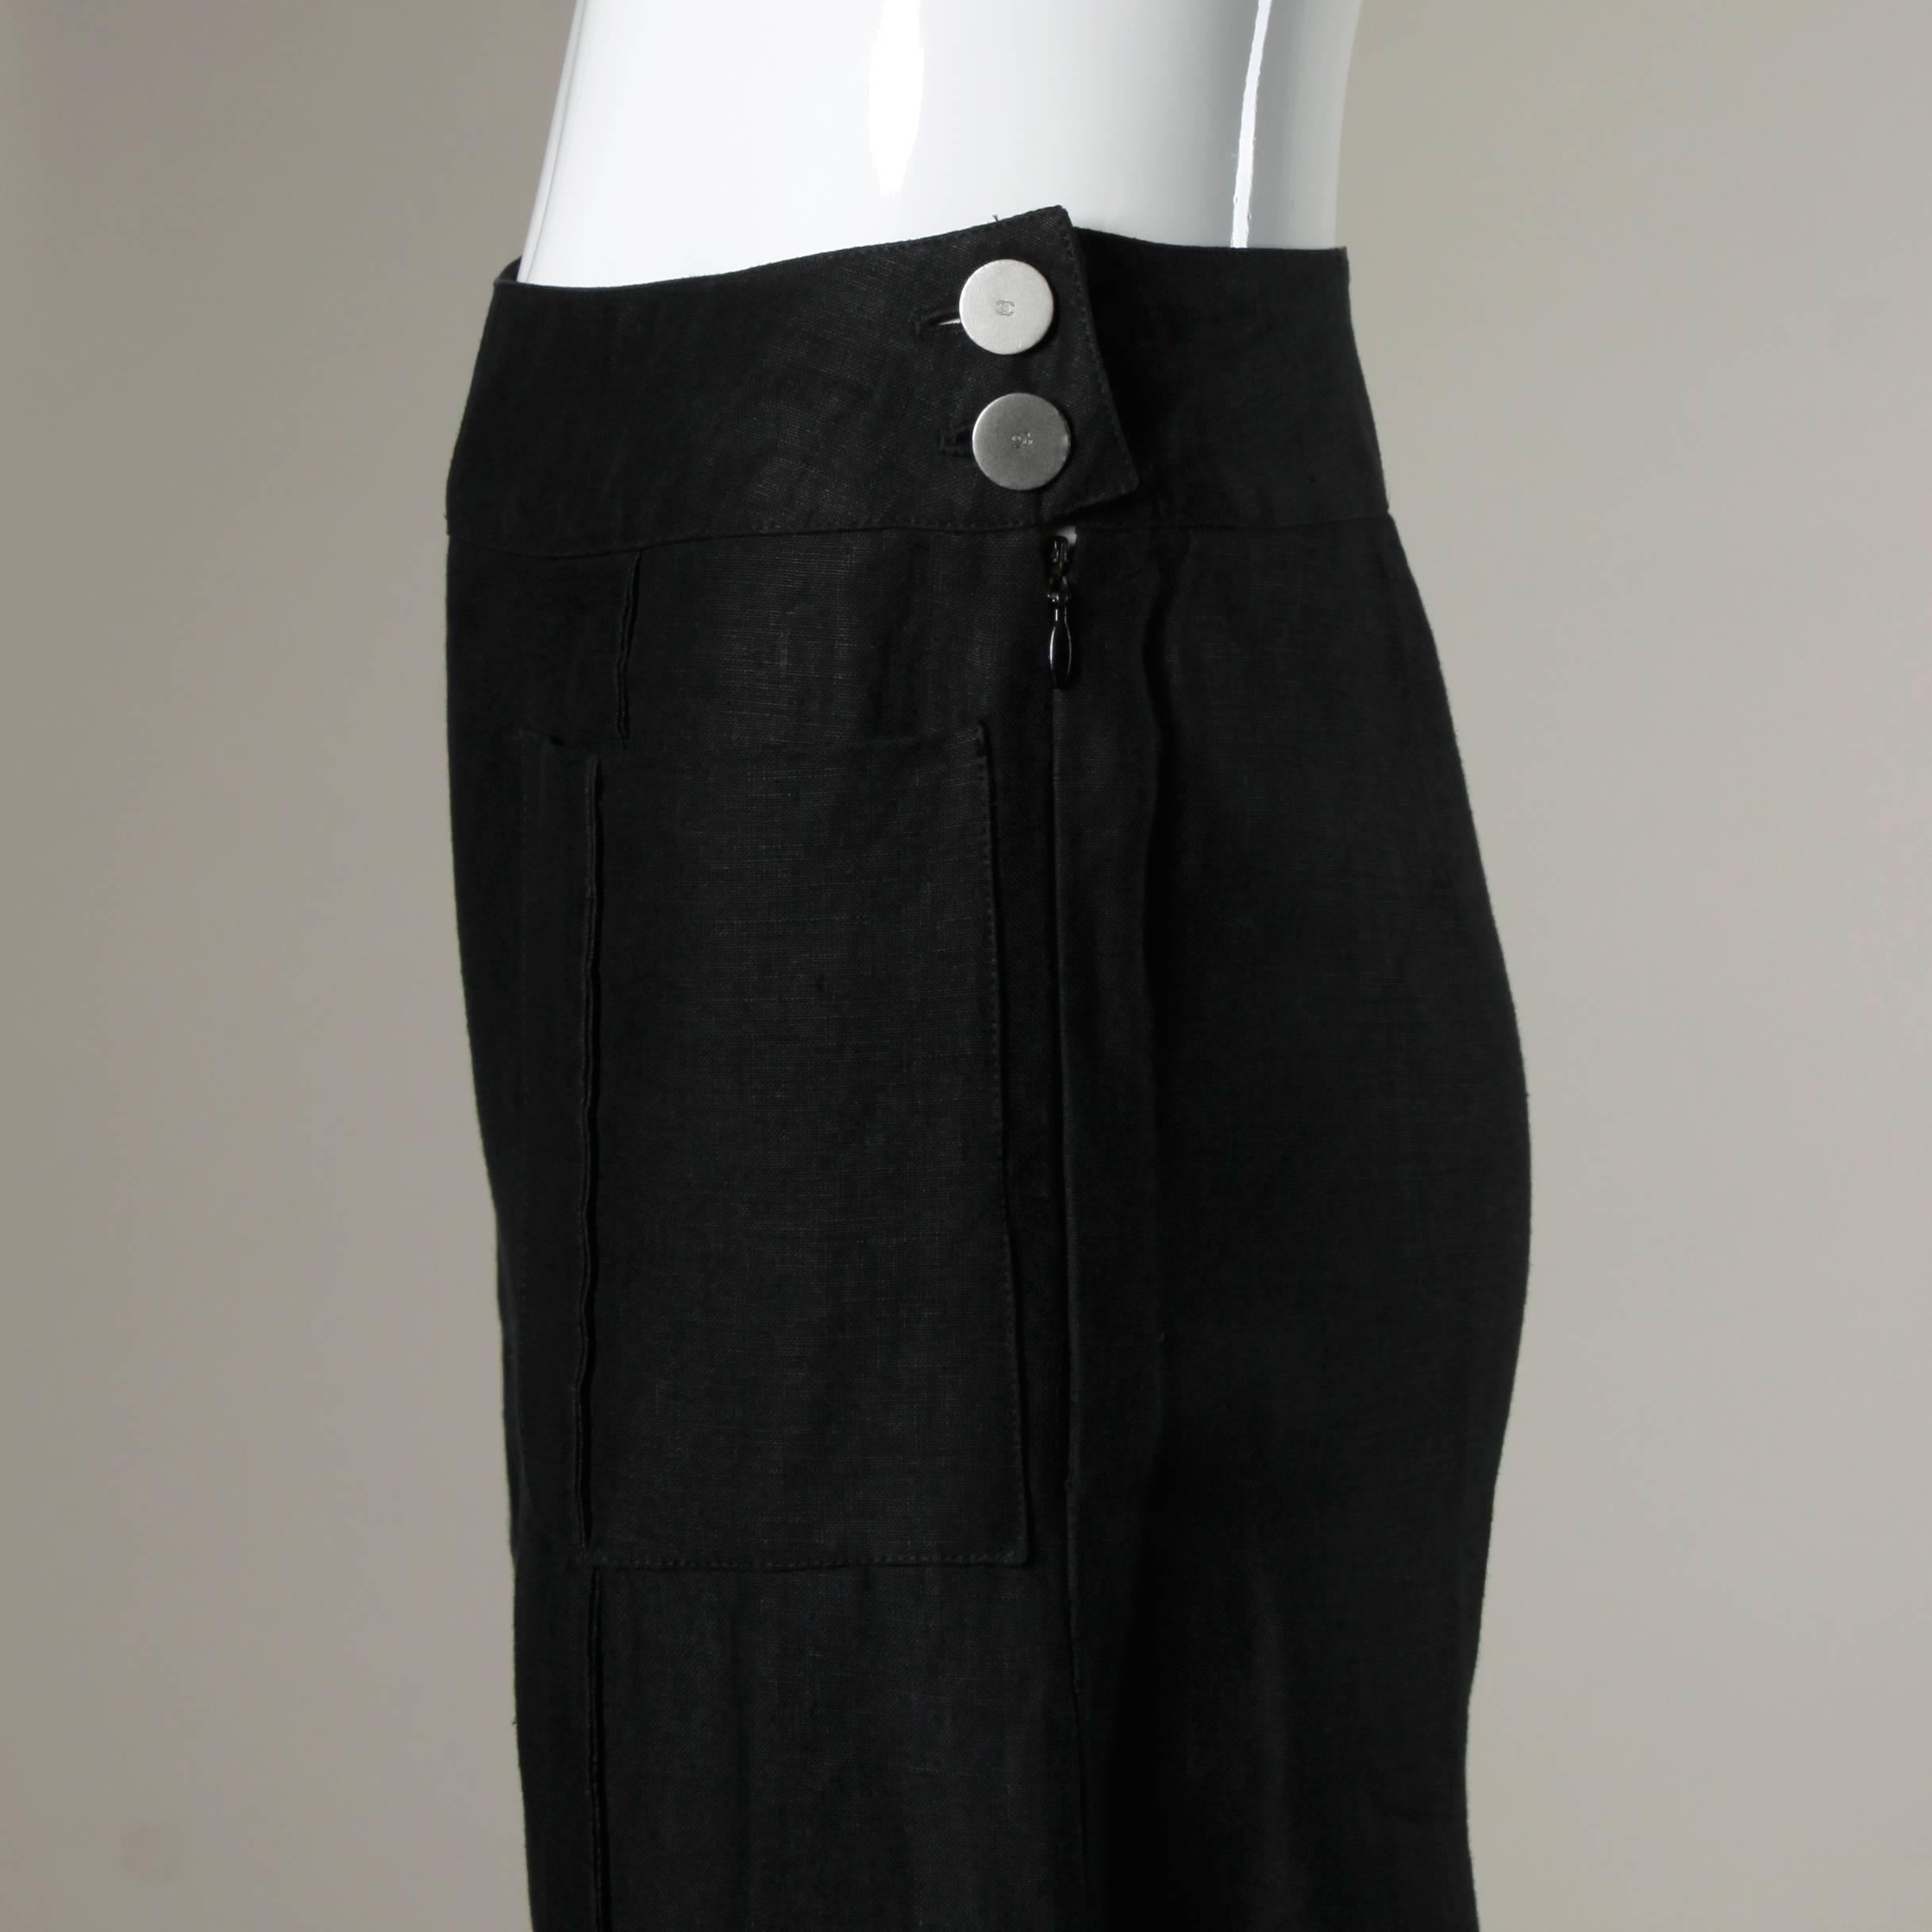 Black linen high waisted trousers by Chanel. Classic tailoring and flattering wide legged flared fit.

Details:

Unlined
Front Pockets
Side Zip and Button Closure
Marked Size: F 36
Color: Black
Fabric: 100% Linen 
Label: Chanel 

Pant